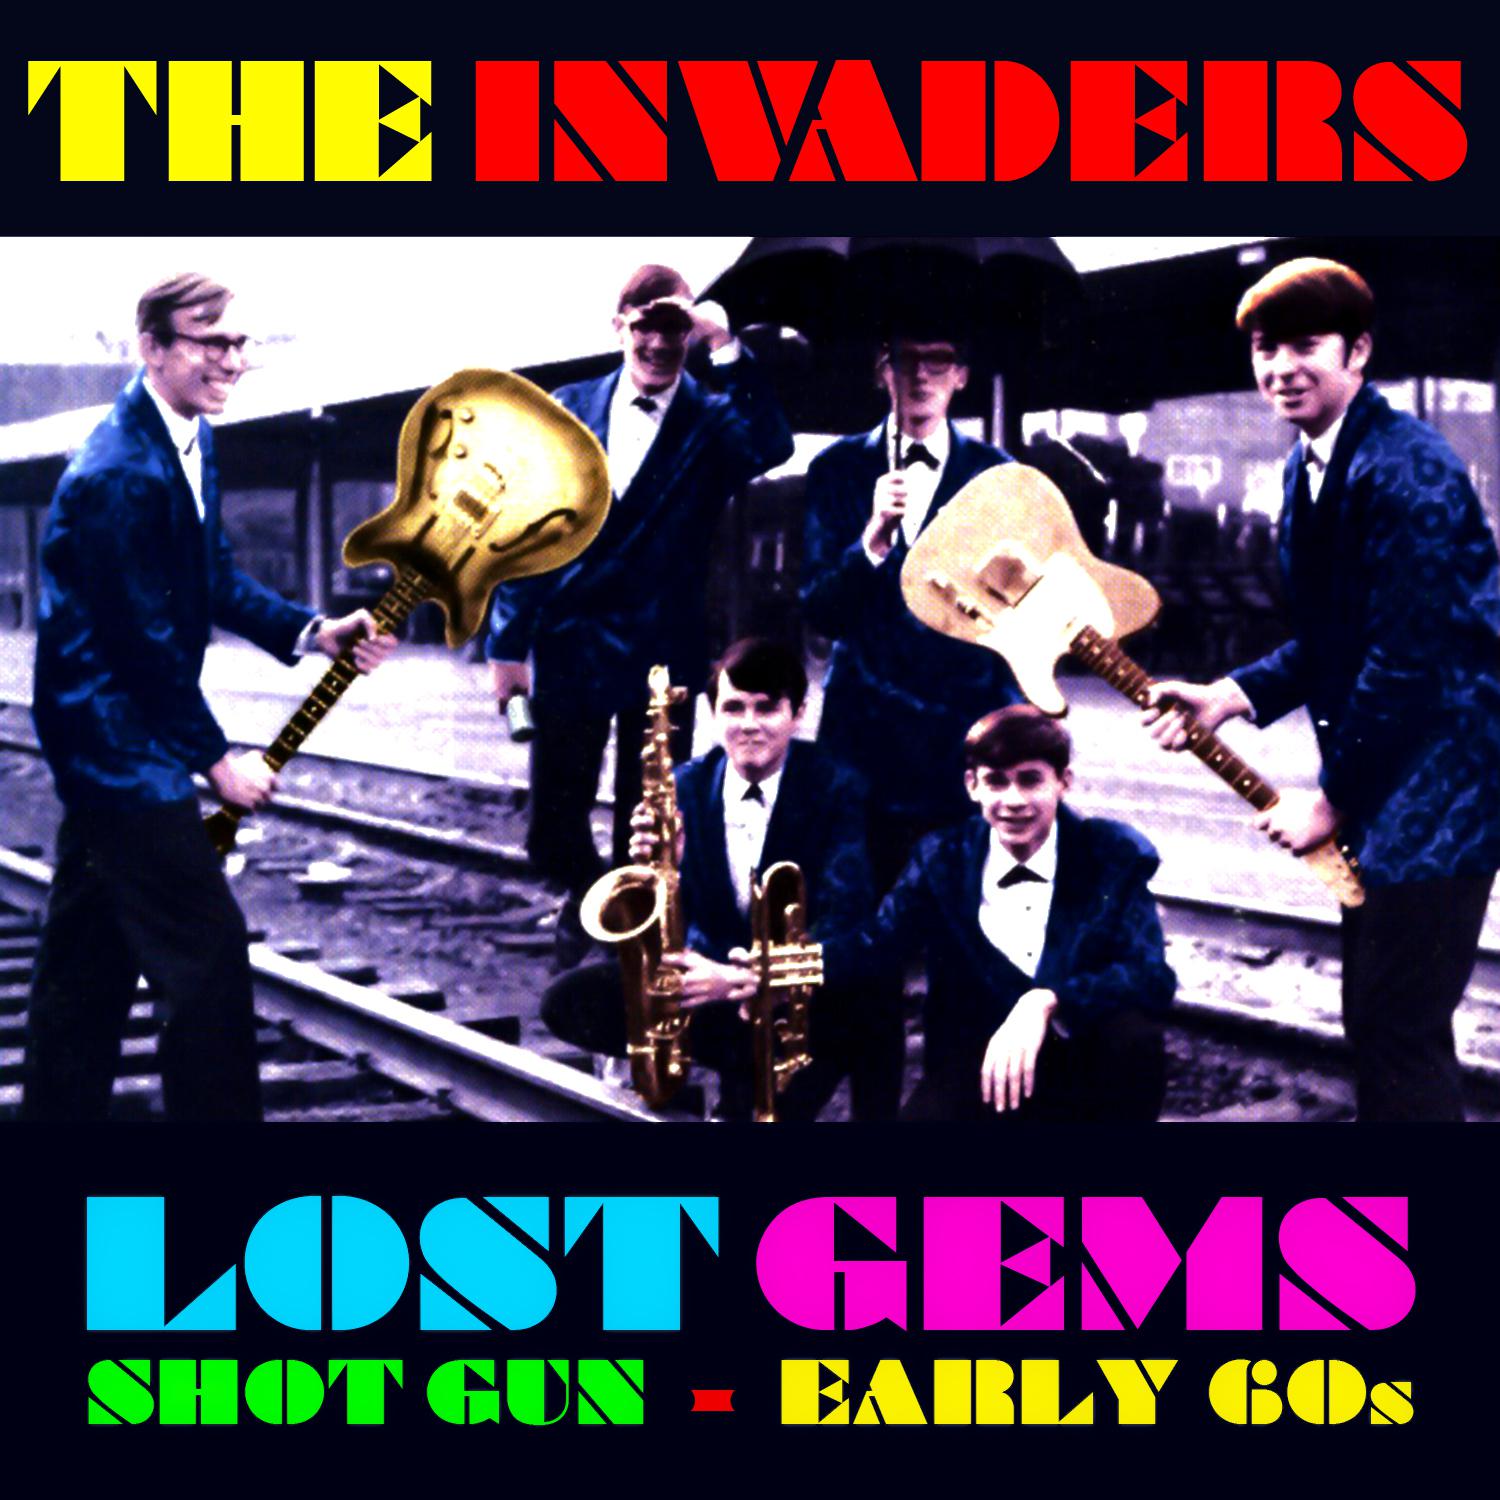 The Invaders - Just For Kicks